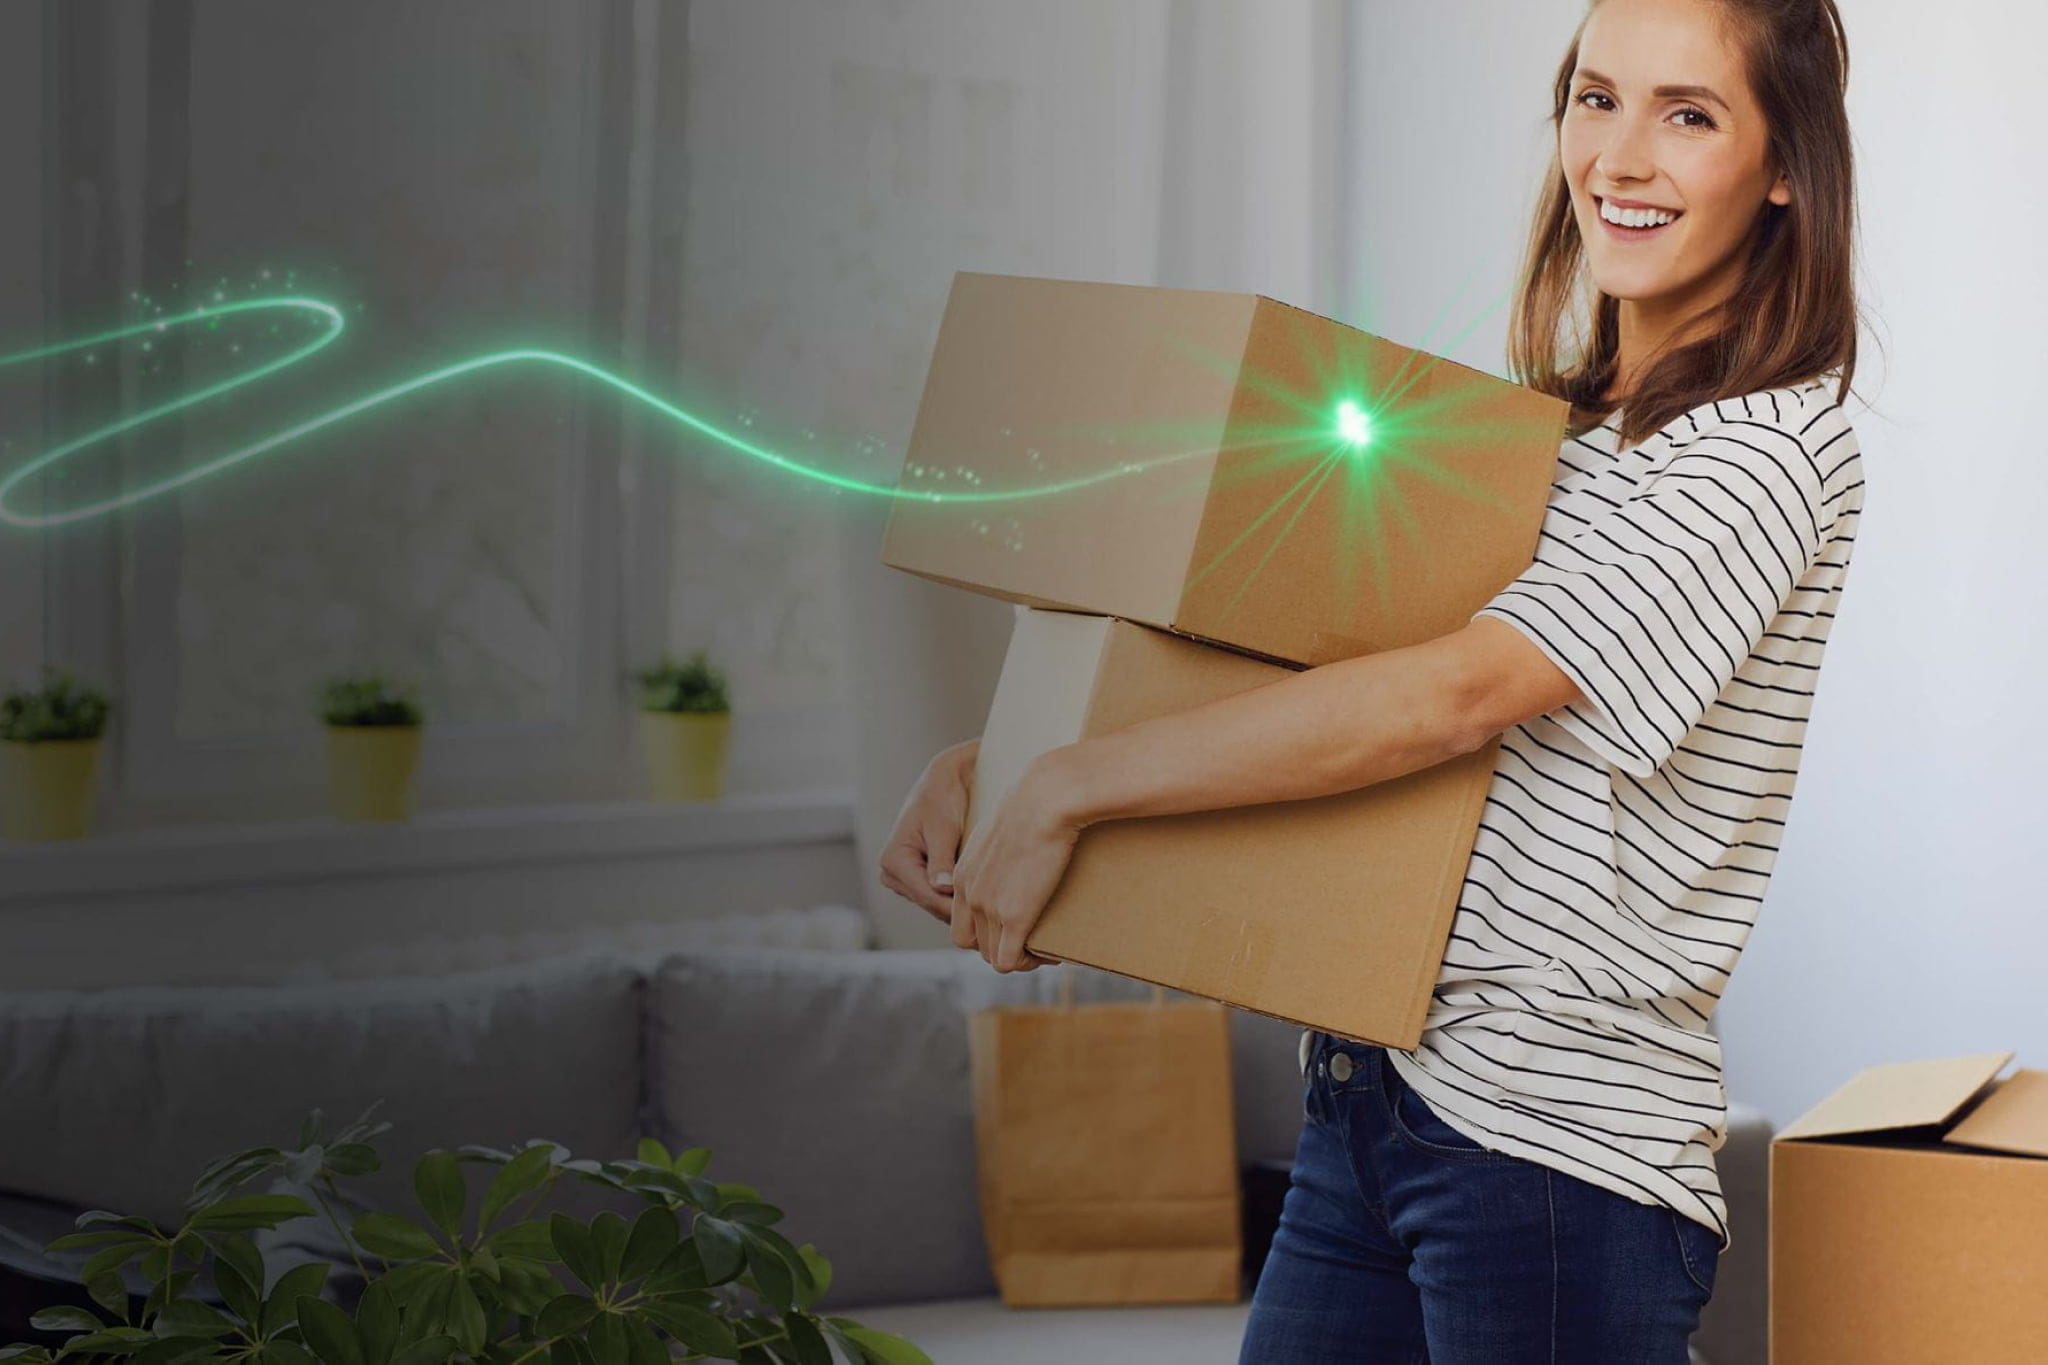 Smiling lady moving boxes